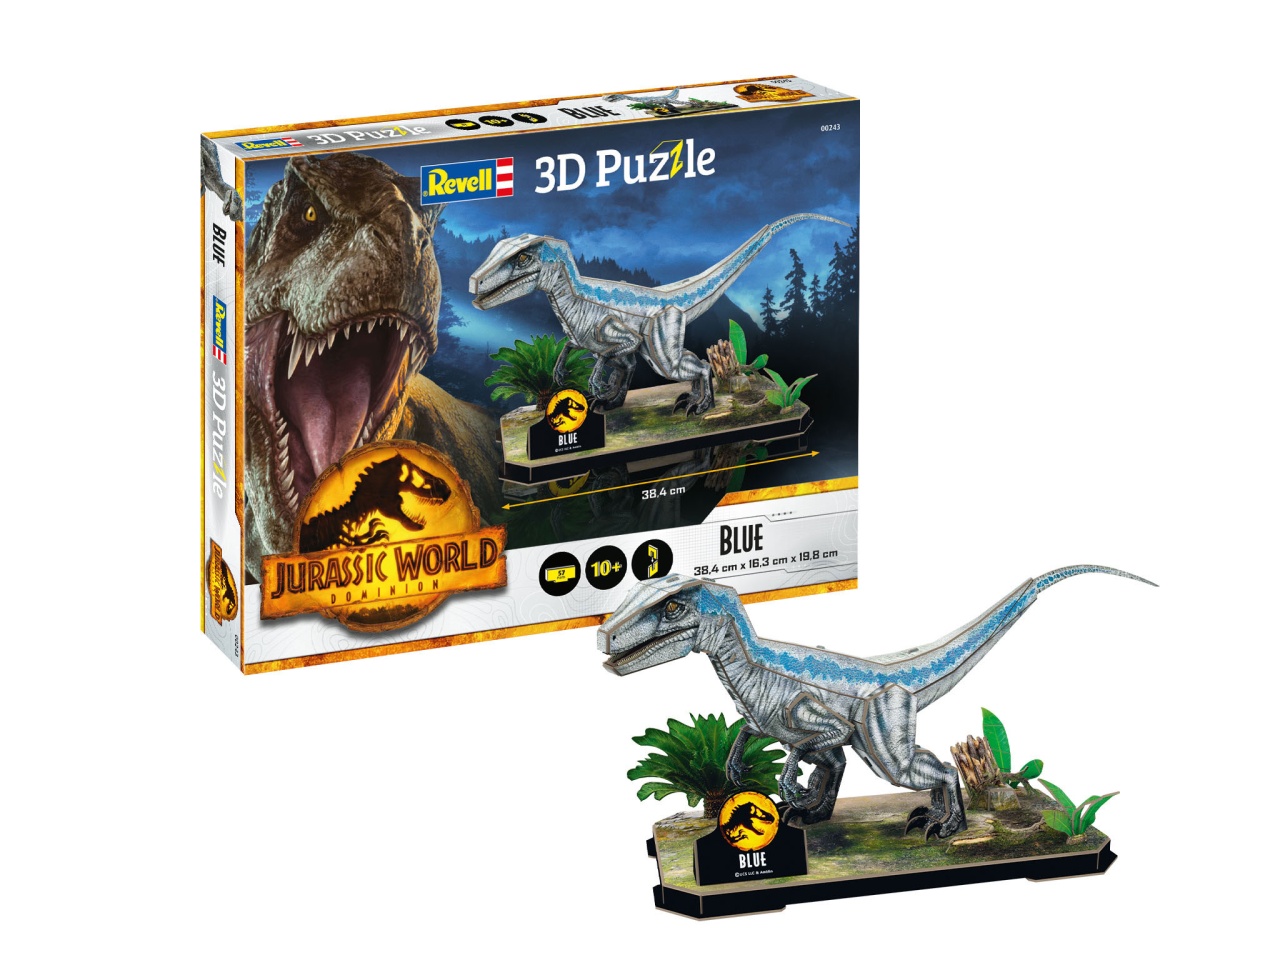 Revell 00243 Jurassic World 3D Puzzle Blue